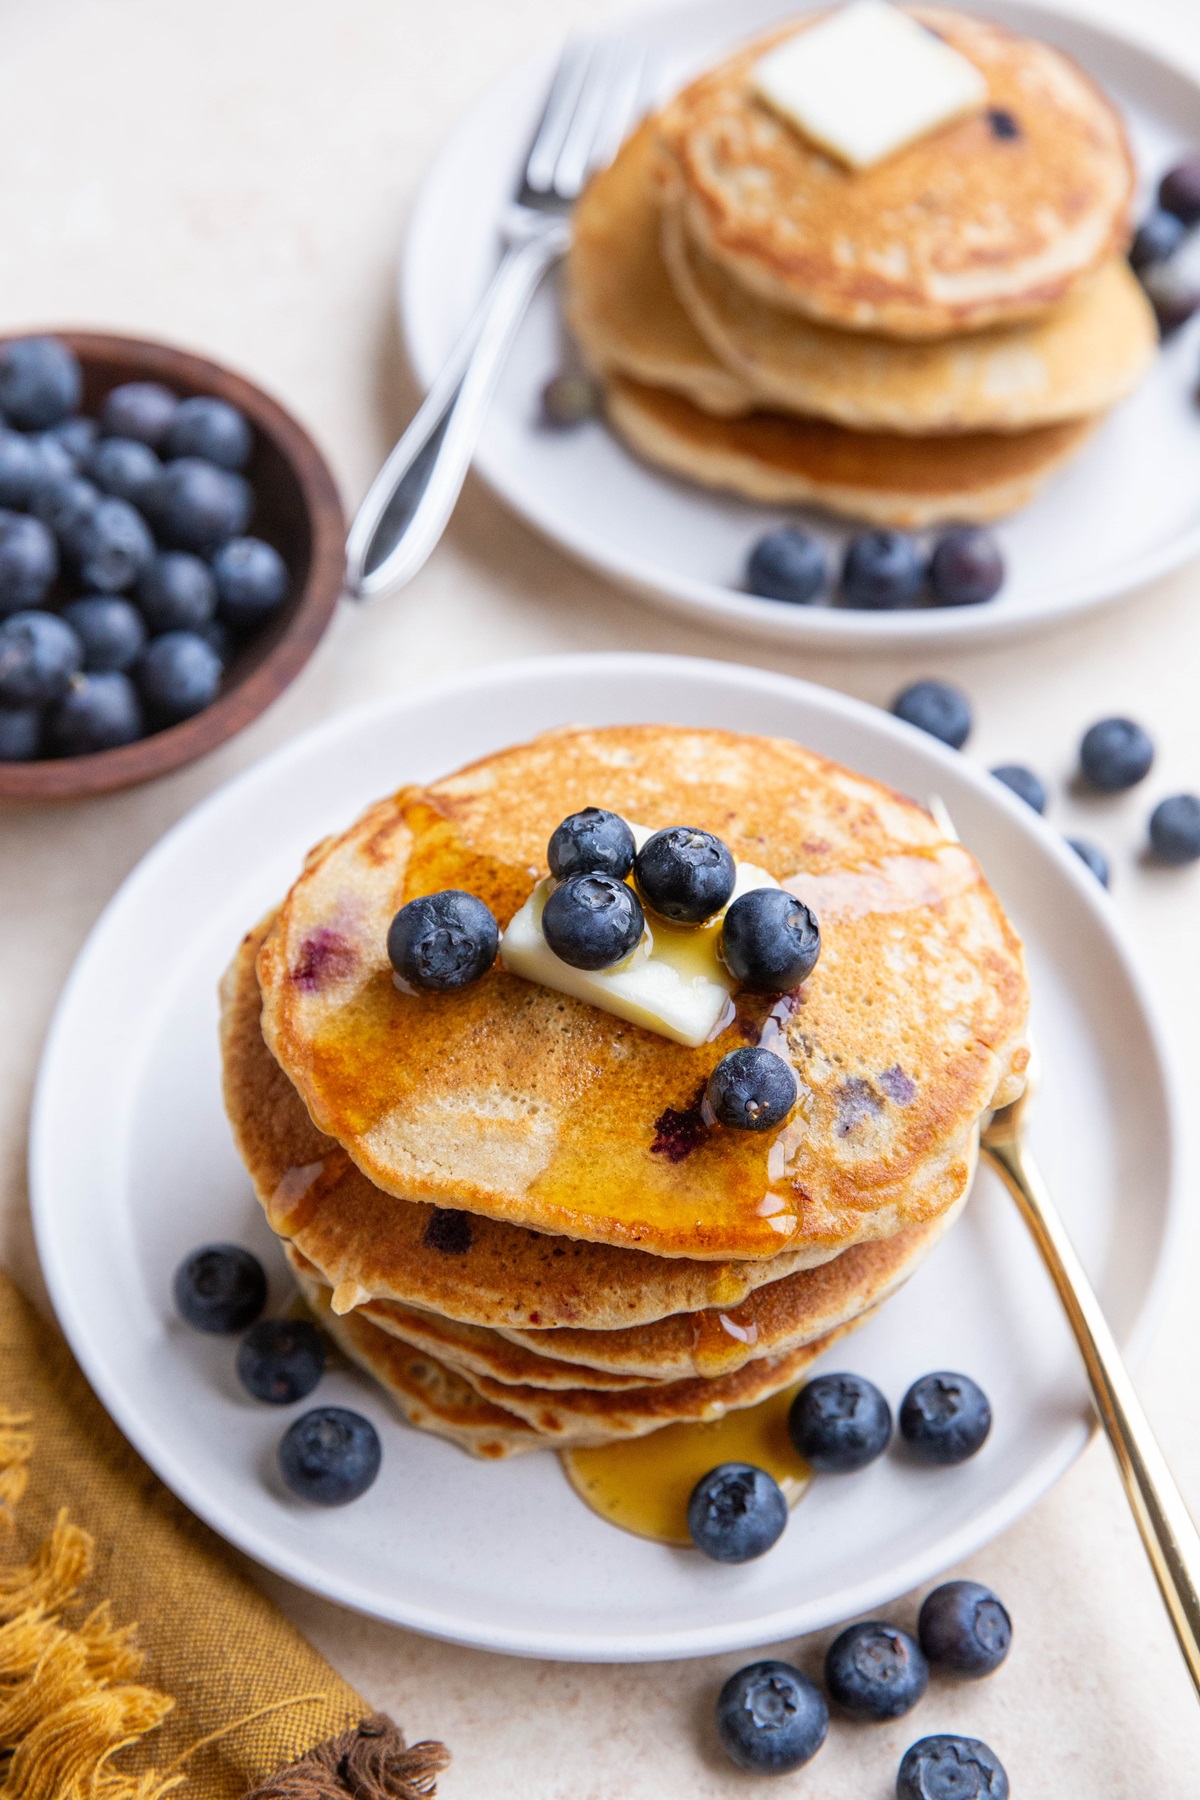 Two plates of blueberry pancakes with honey, butter, and fresh blueberries on top. A bowl of fresh blueberries to the side and a golden napkin.